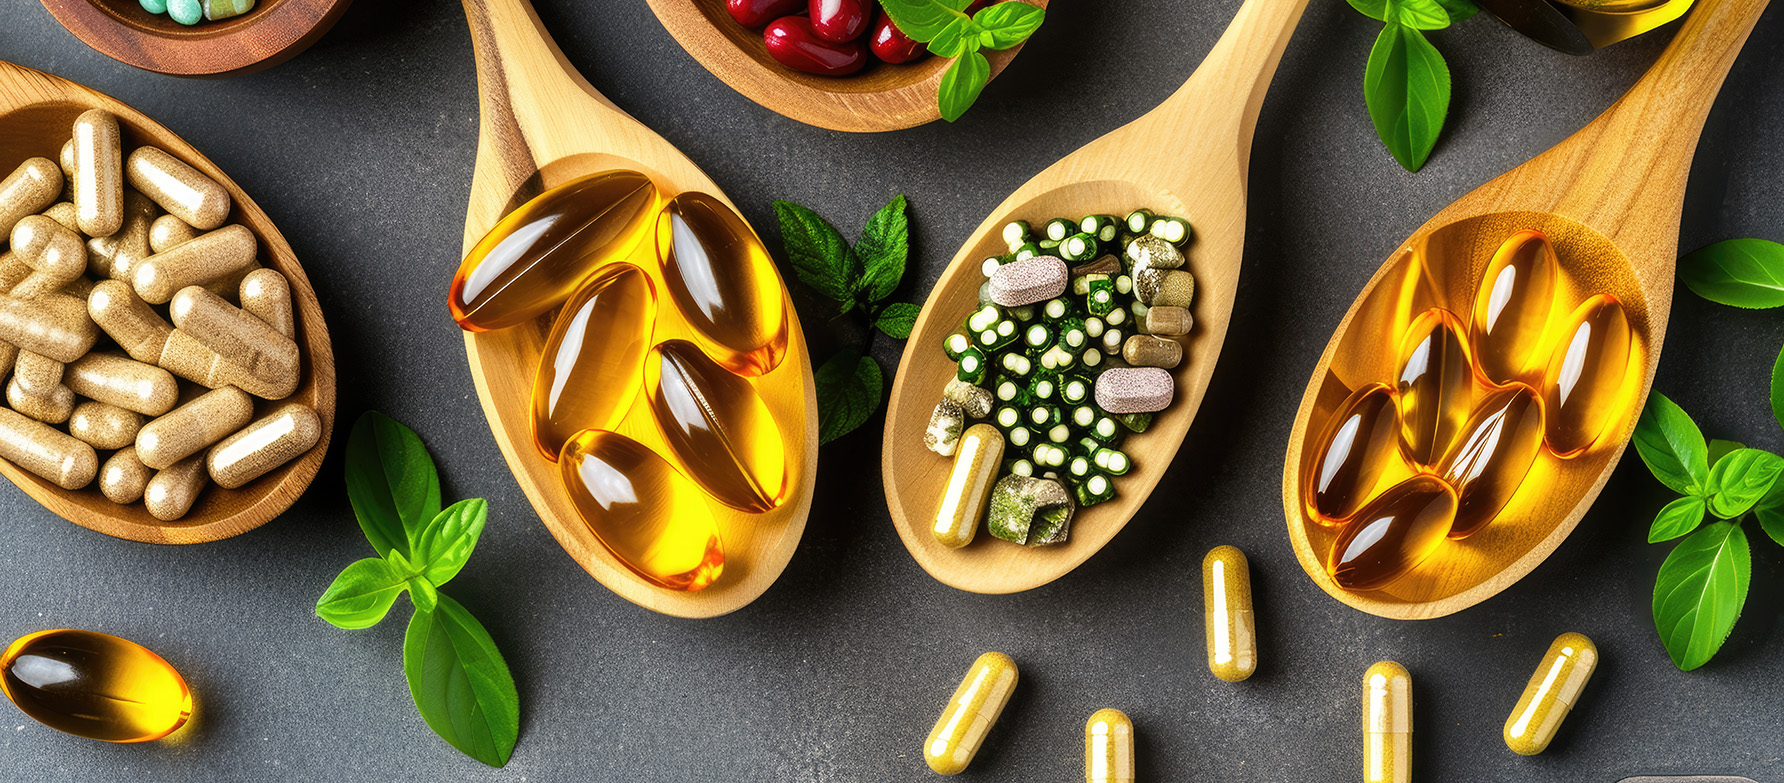 6 Vitamins and Minerals You Need for Optimal Health